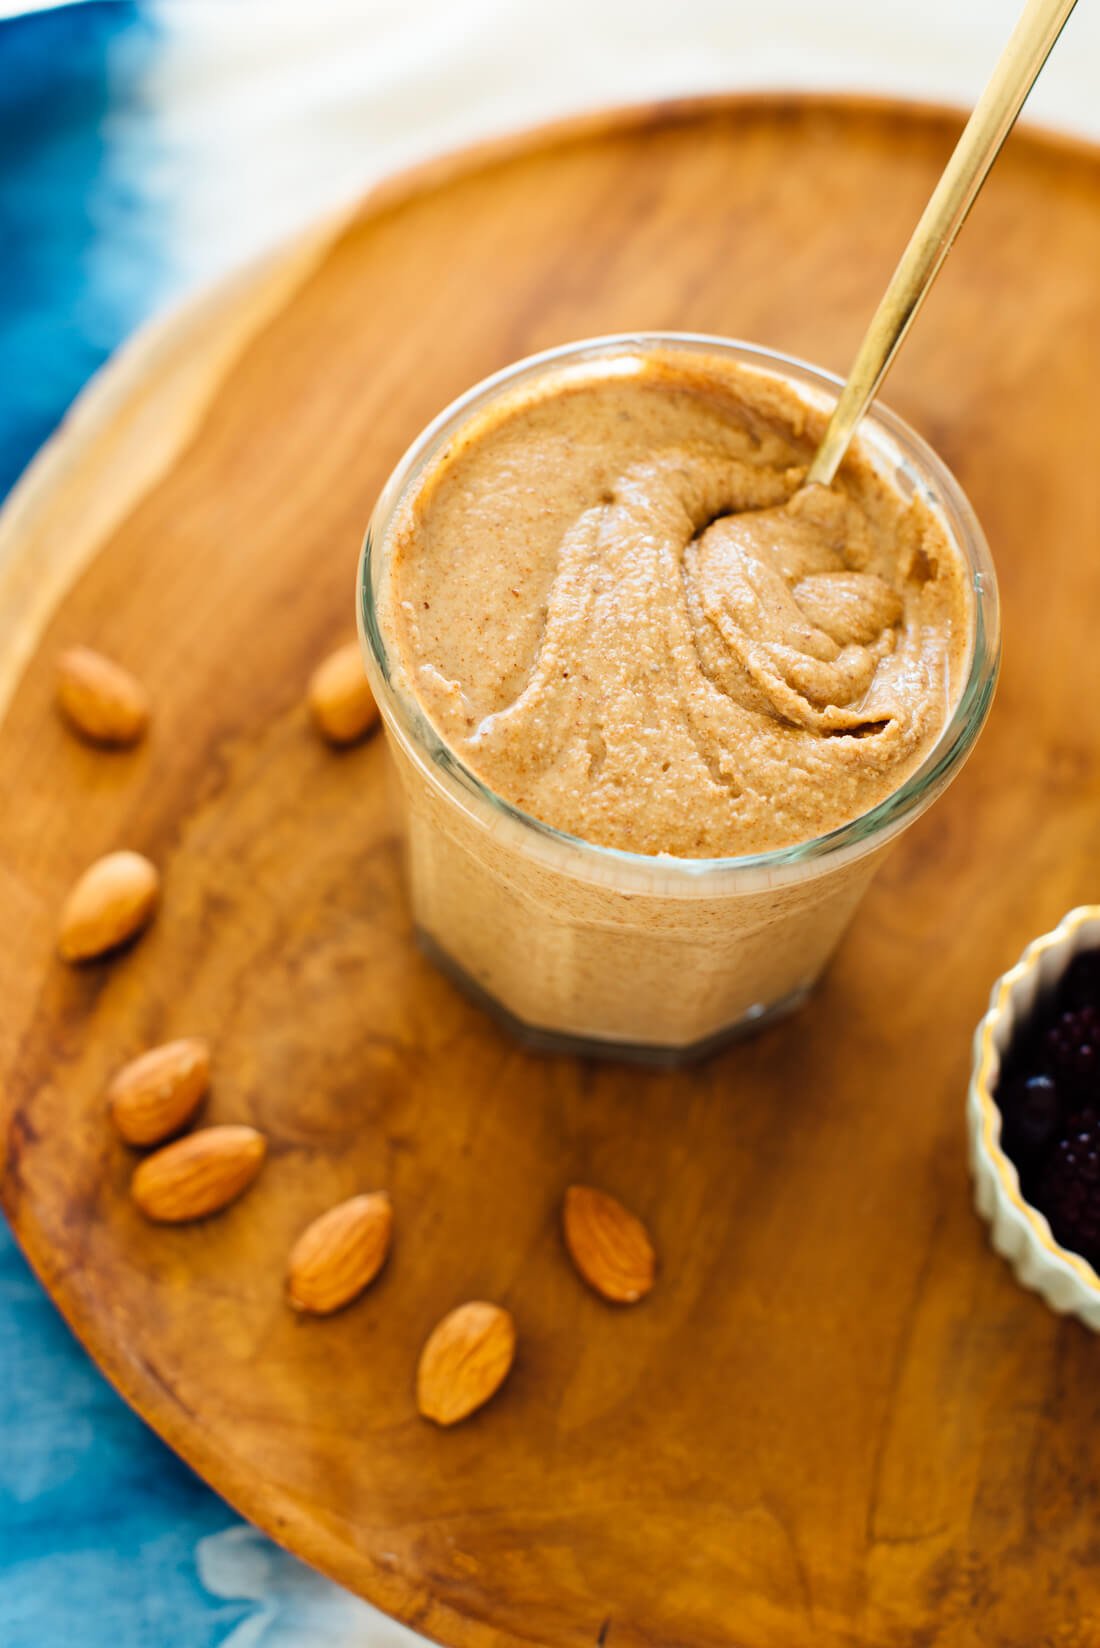 a jar of creamy almond butter surrounded by whole almonds